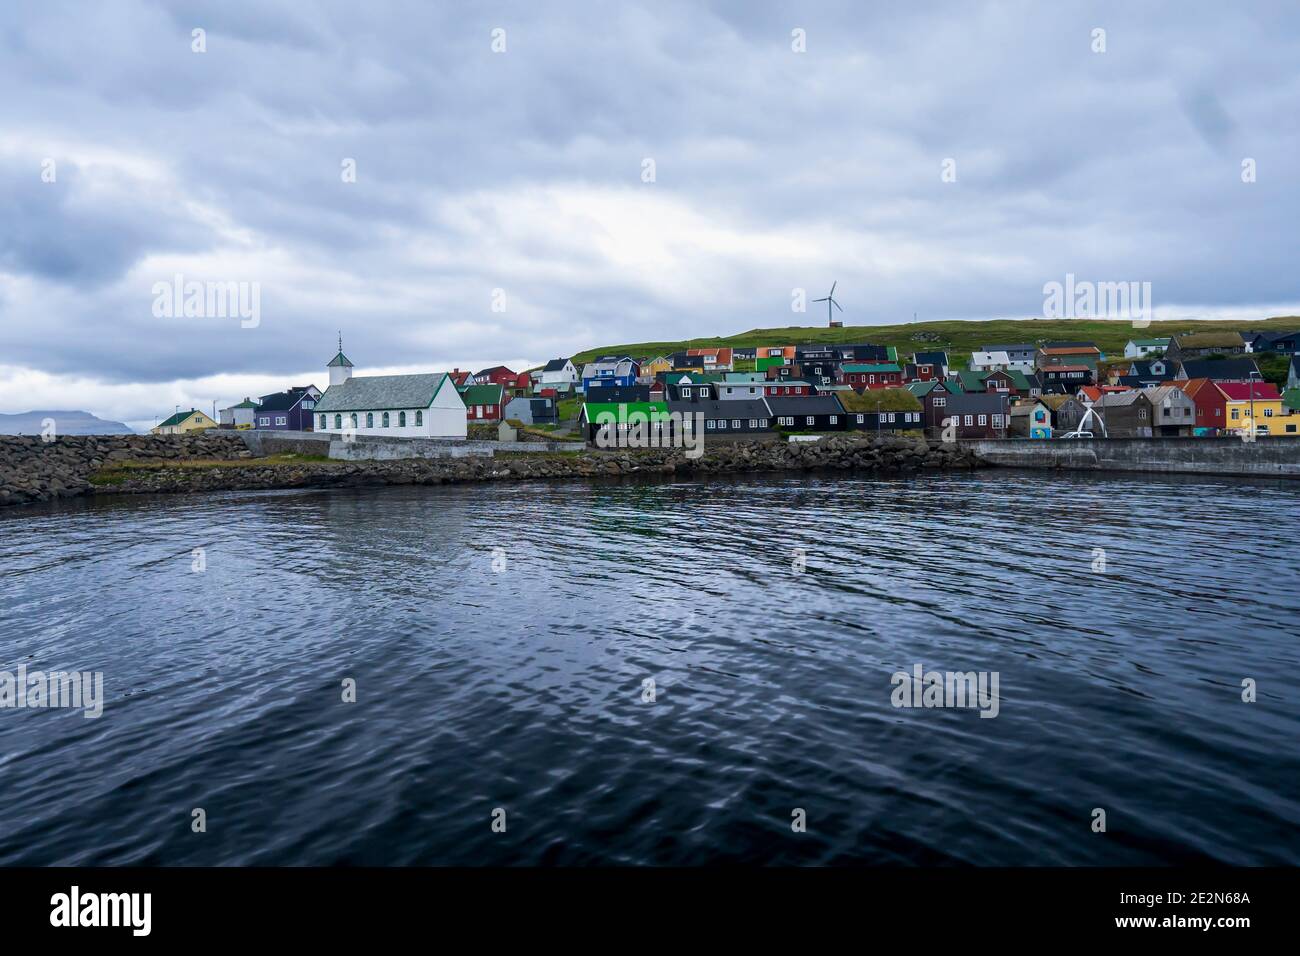 Nolsoy - small picturesque island in the Faroe Islands reached from Torshavn. View of a wooden, traditional church, colorful houses with grass roofs. Stock Photo